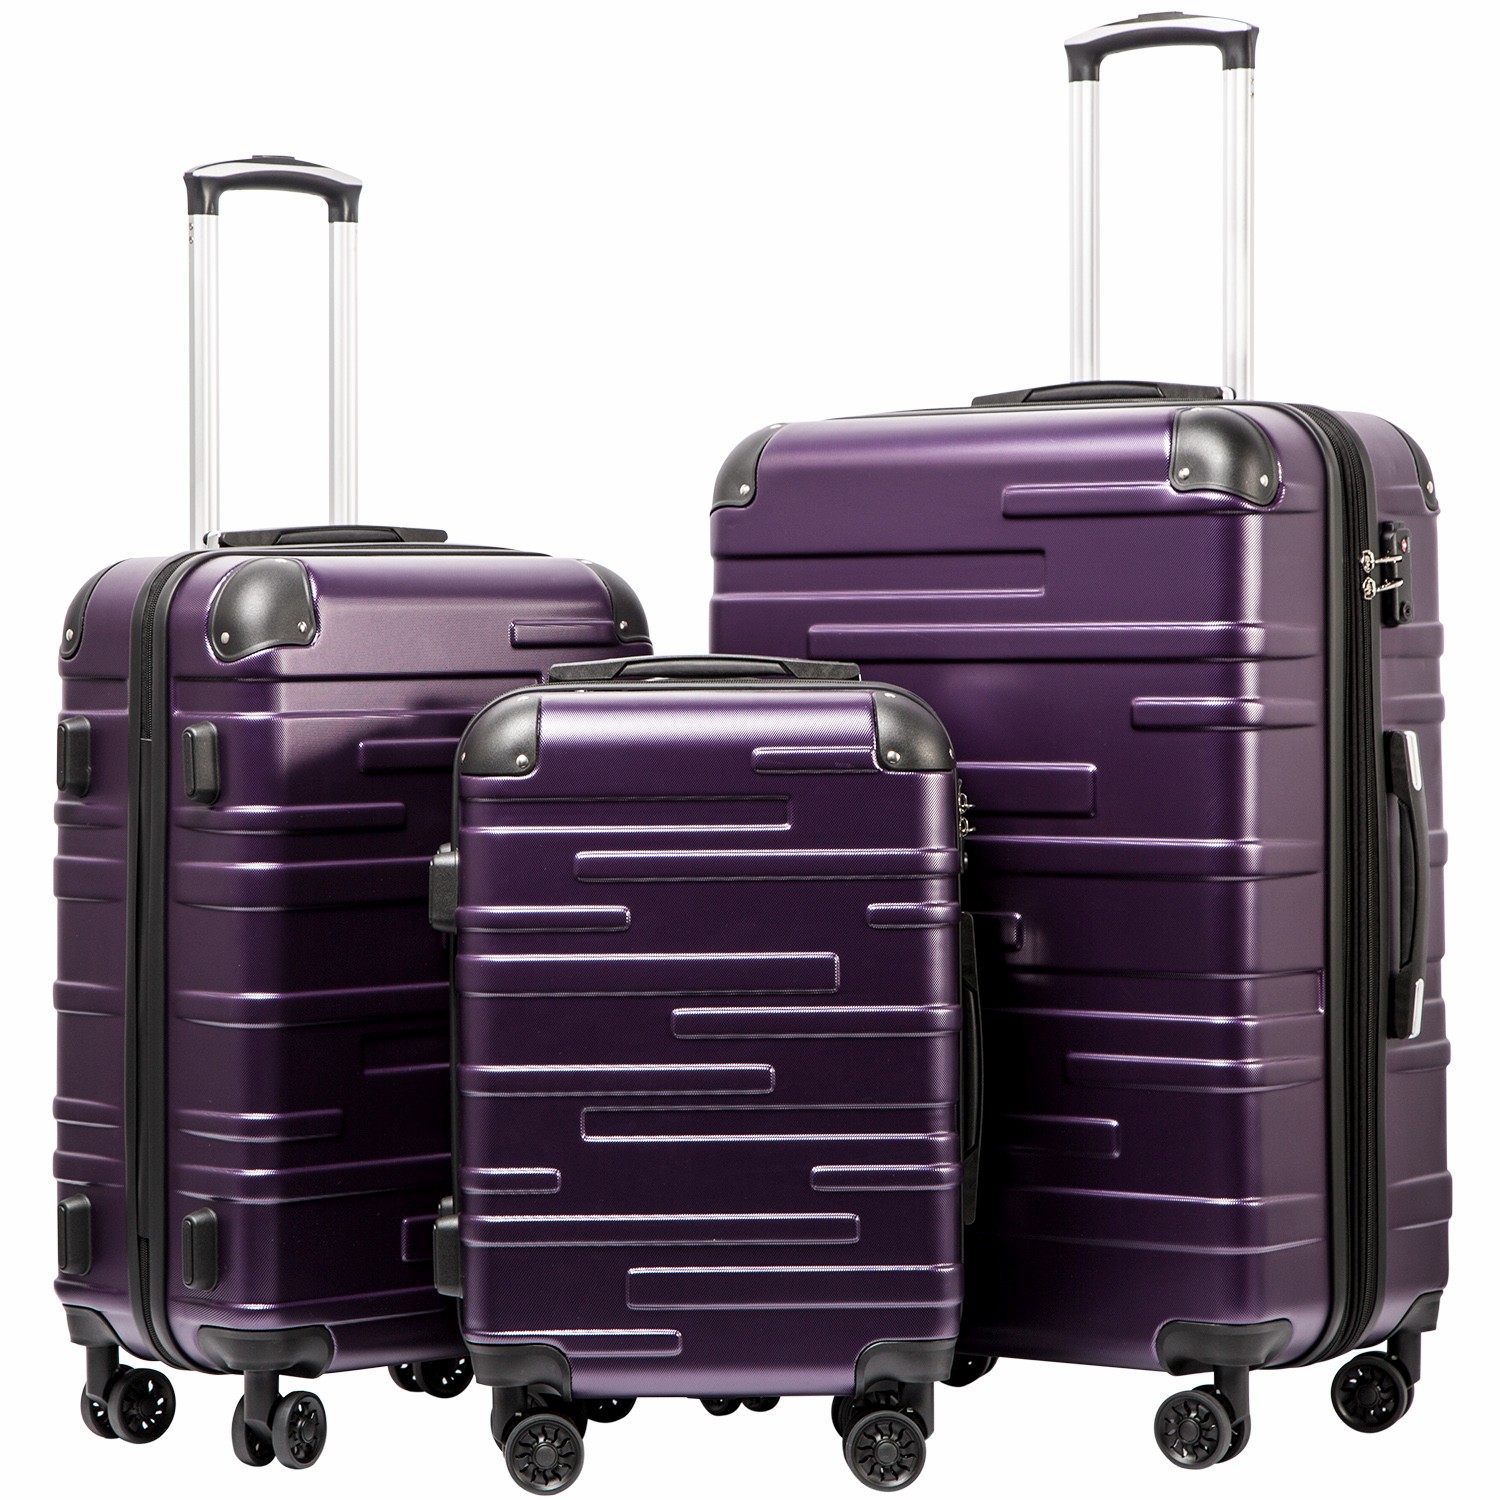 Coolife Luggage Expandable Suitcase 3 Piece Set with TSA Lock Spinner 20in24in28in (purple)